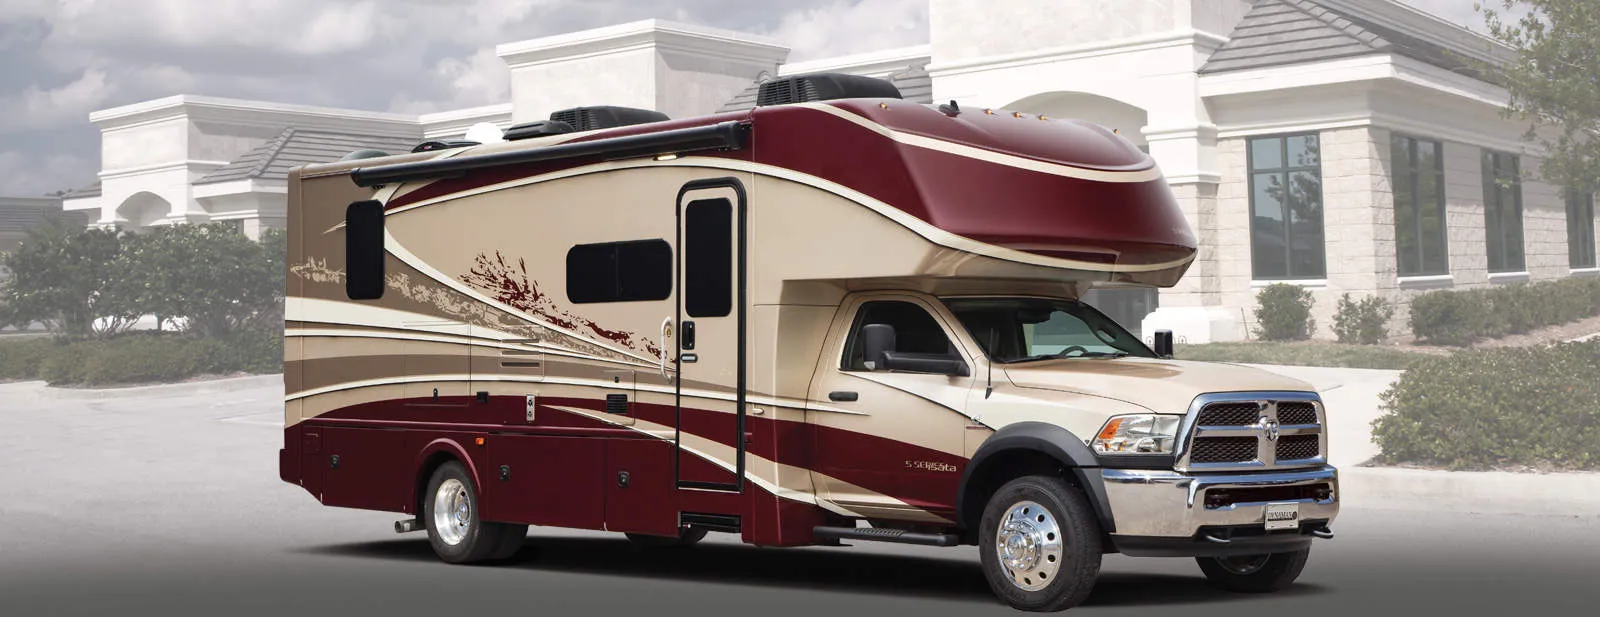 Class C Rvs With King Bed Floorplan With Comparison Table